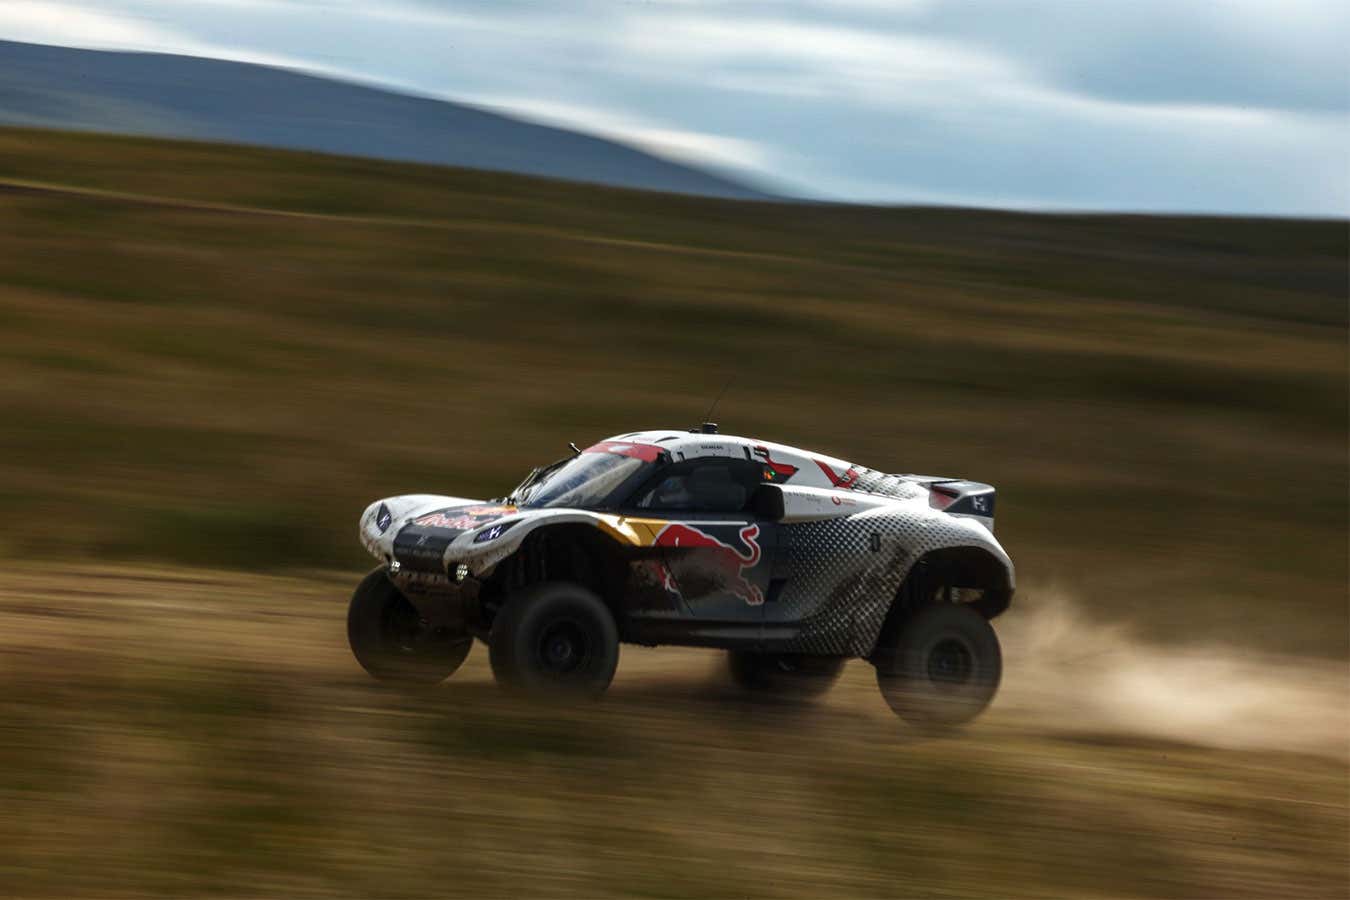 Hydrogen off-road race car tested to limits in former coal mine [Video]